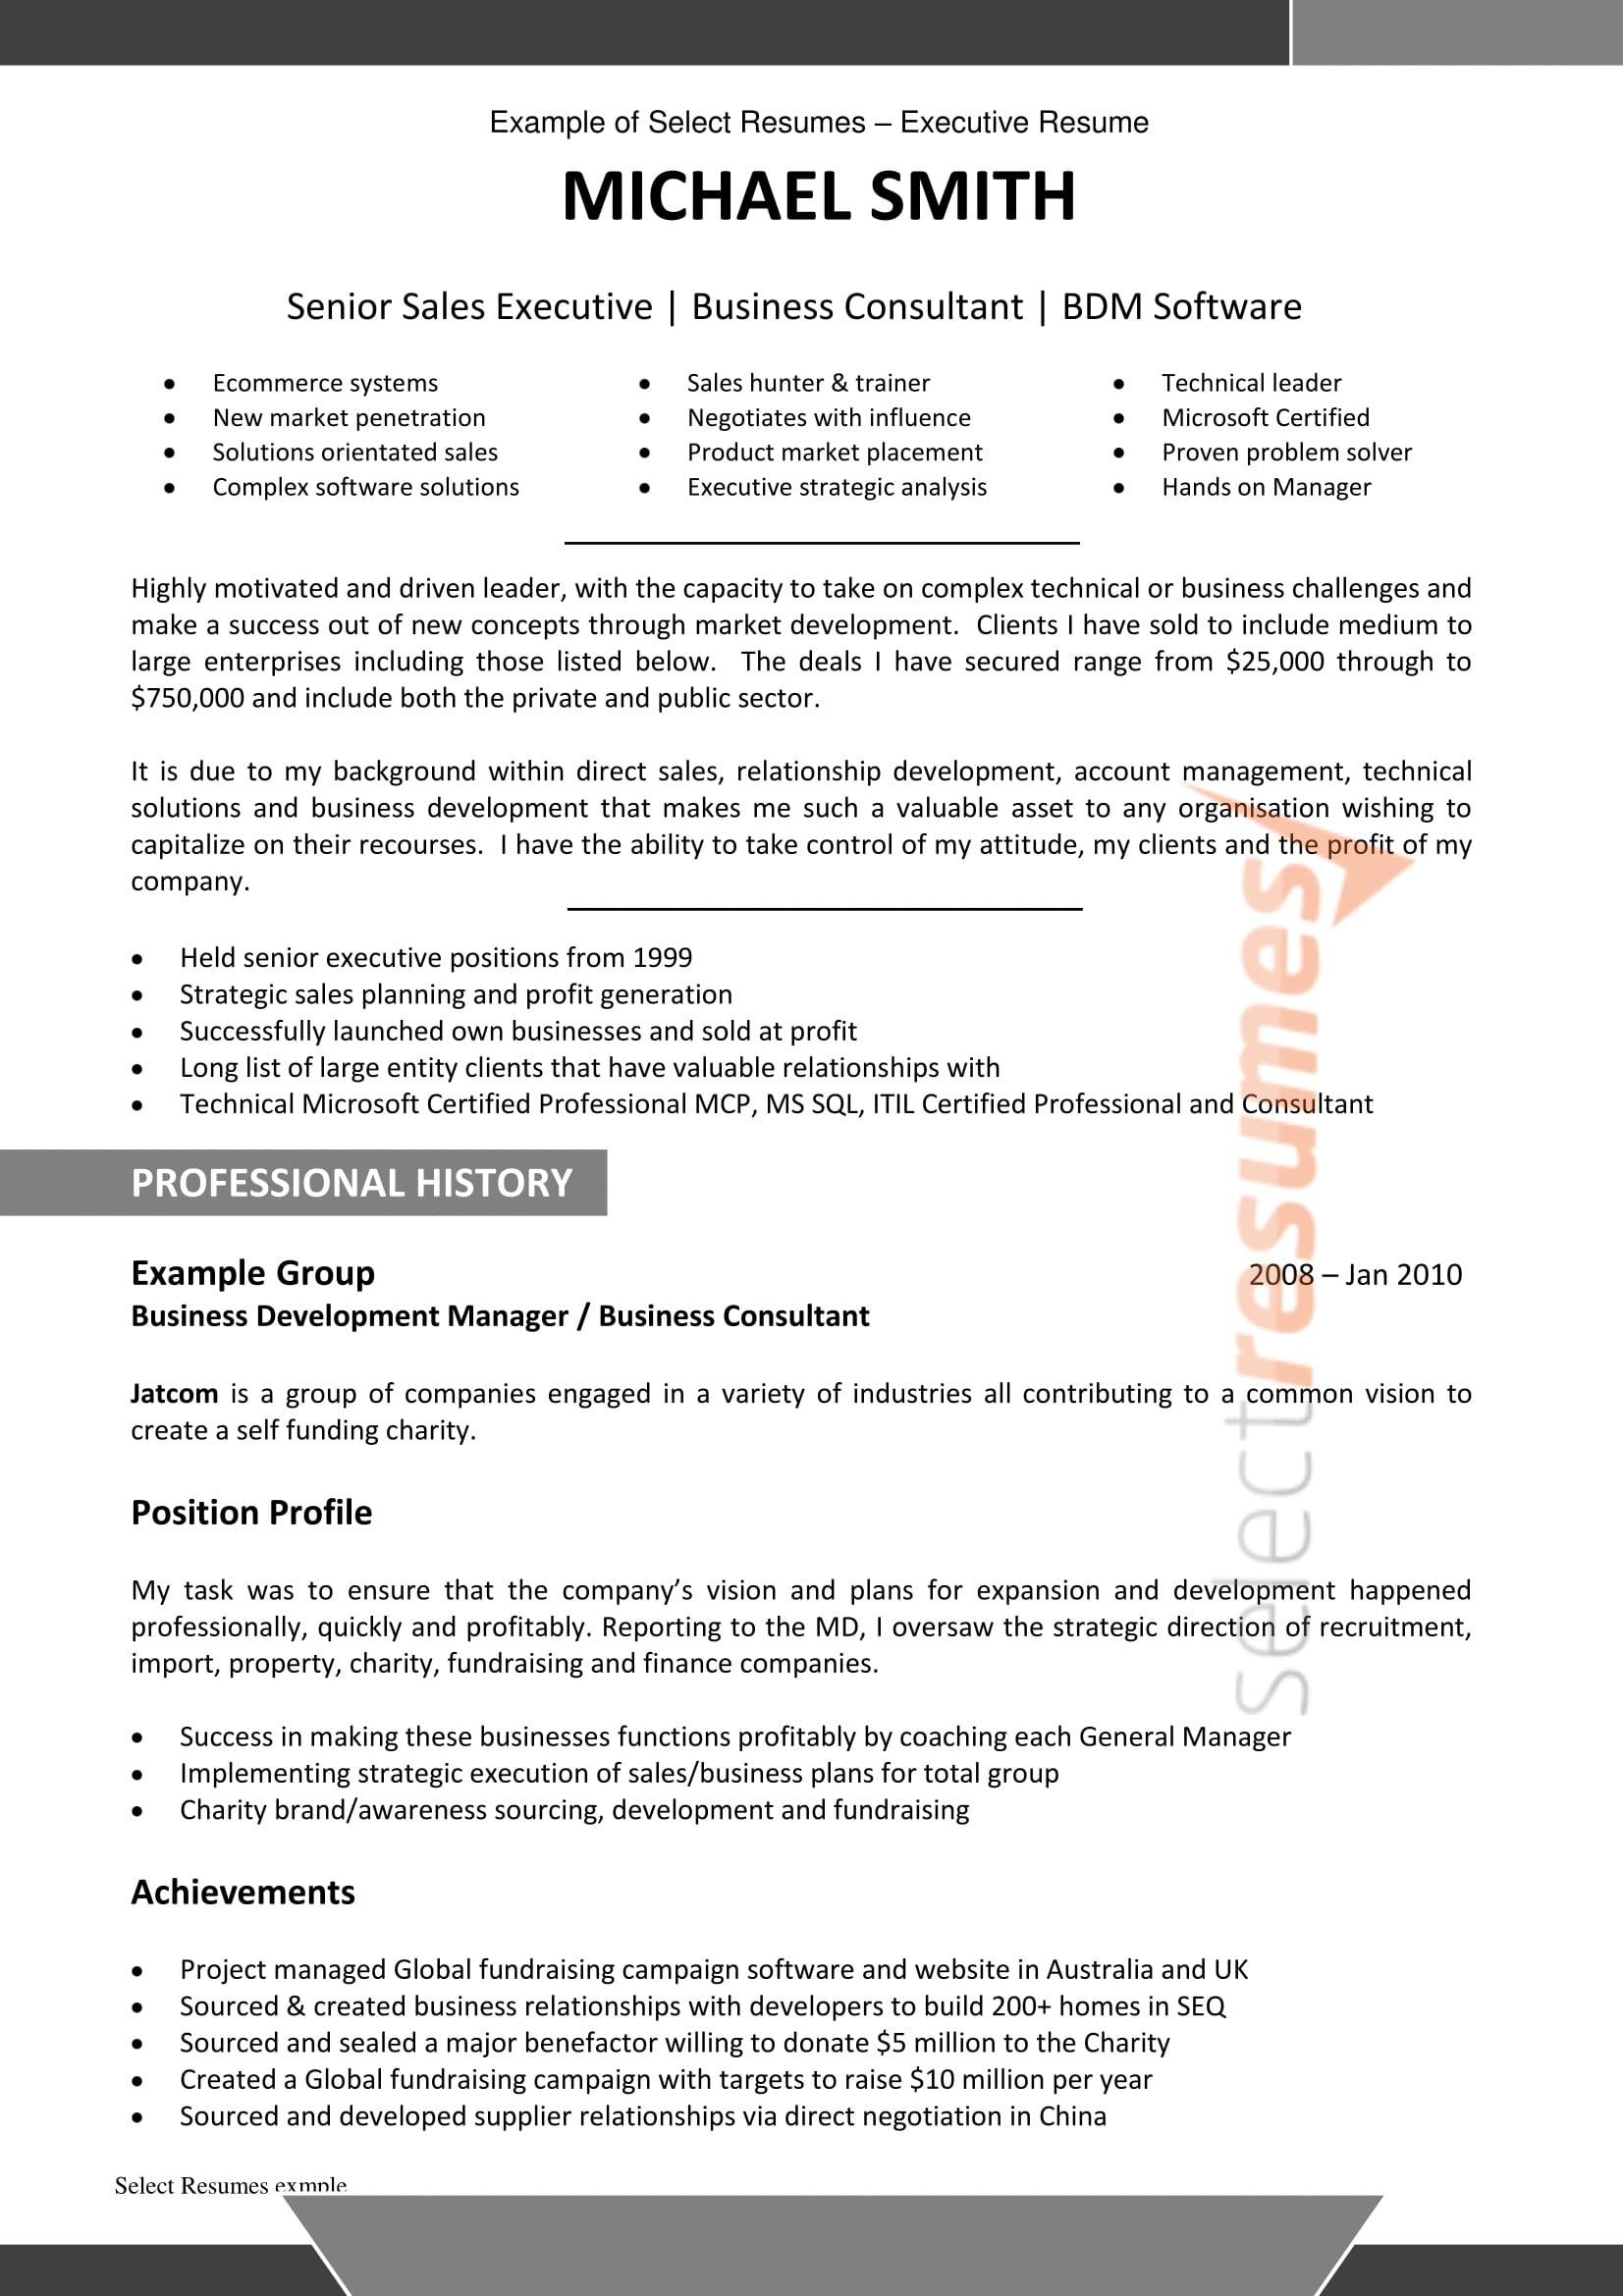 Professional Resume Services Professional Resume Writers pertaining to measurements 1653 X 2339